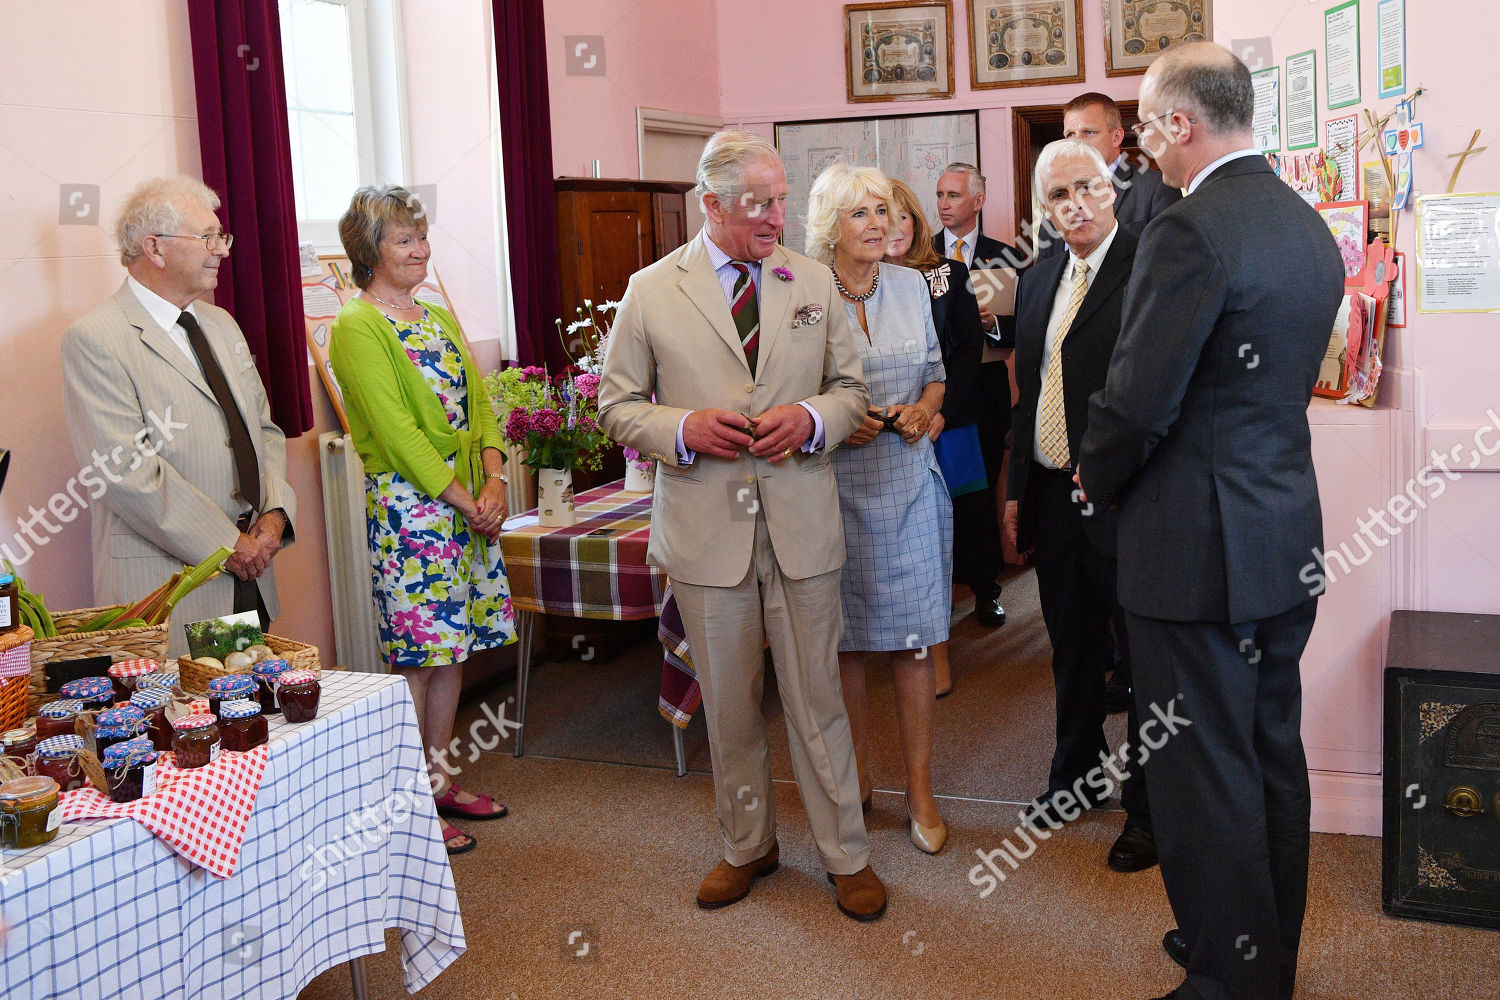 prince-charles-and-camilla-duchess-of-cornwall-visiting-to-wales-day-2-uk-shutterstock-editorial-9733343o.jpg